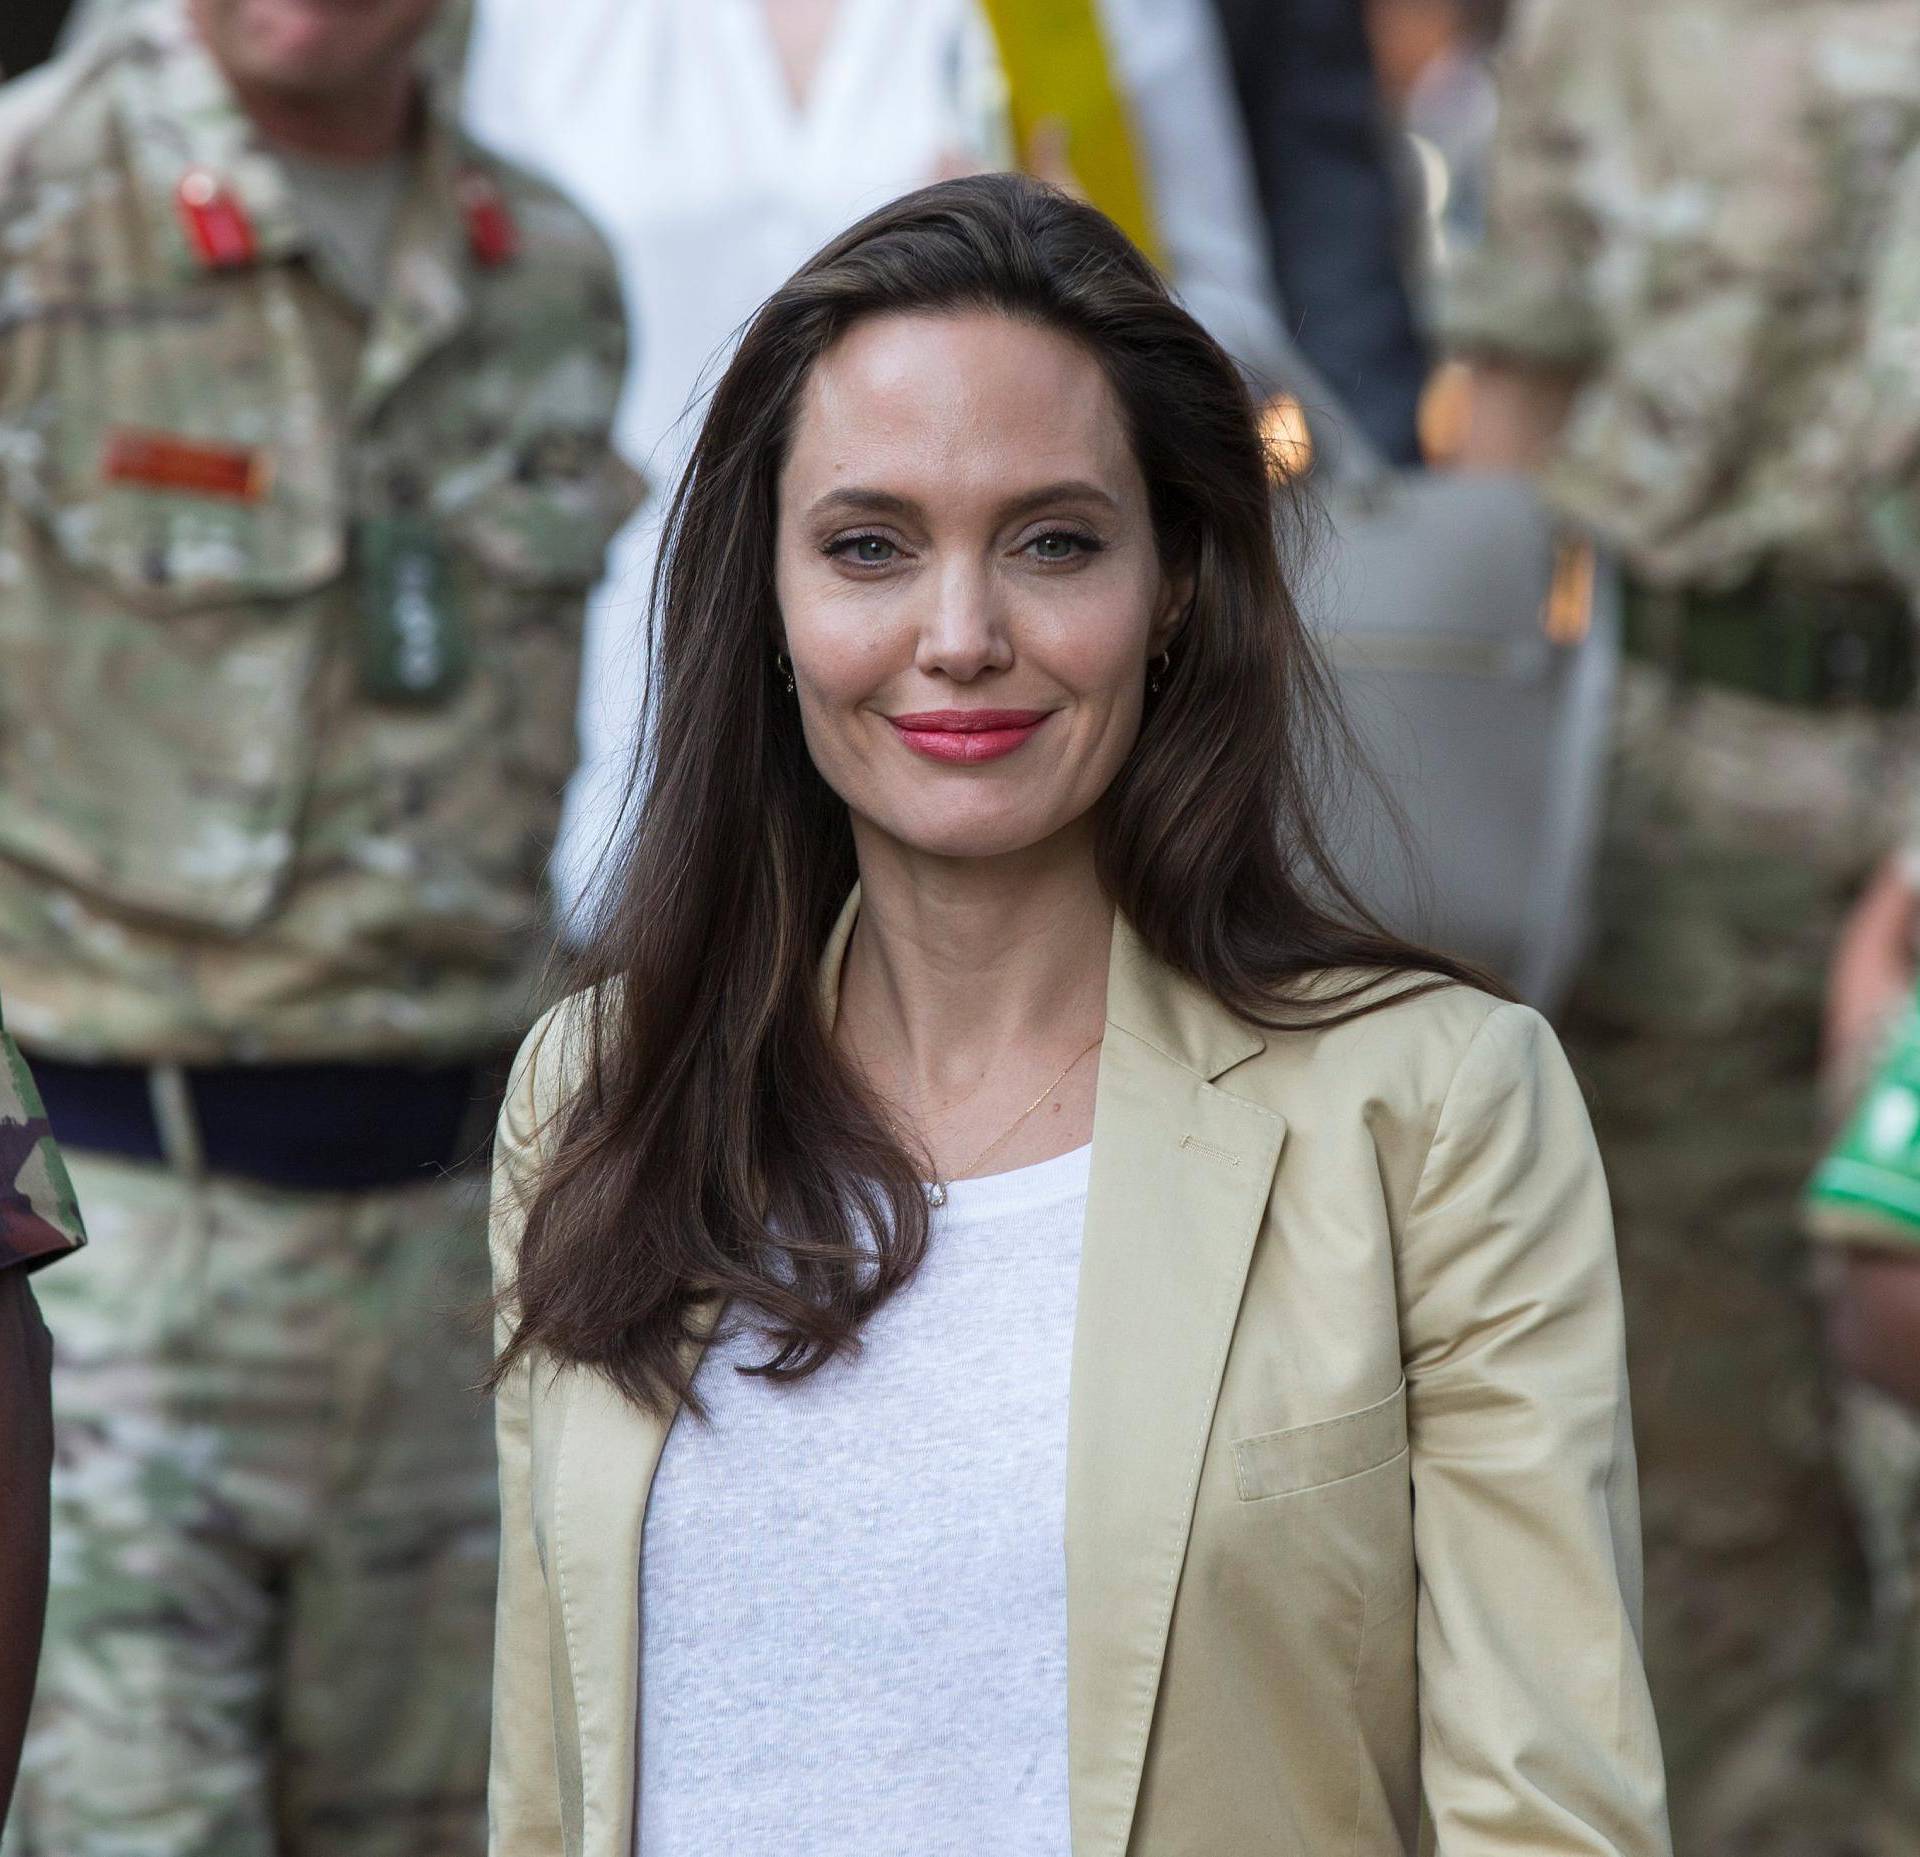 U.S. Actor and UNHCR Special Envoy Angelina Jolie arrives to give a statement at the The International Peace Support Training Centre in Nairobi, Kenya